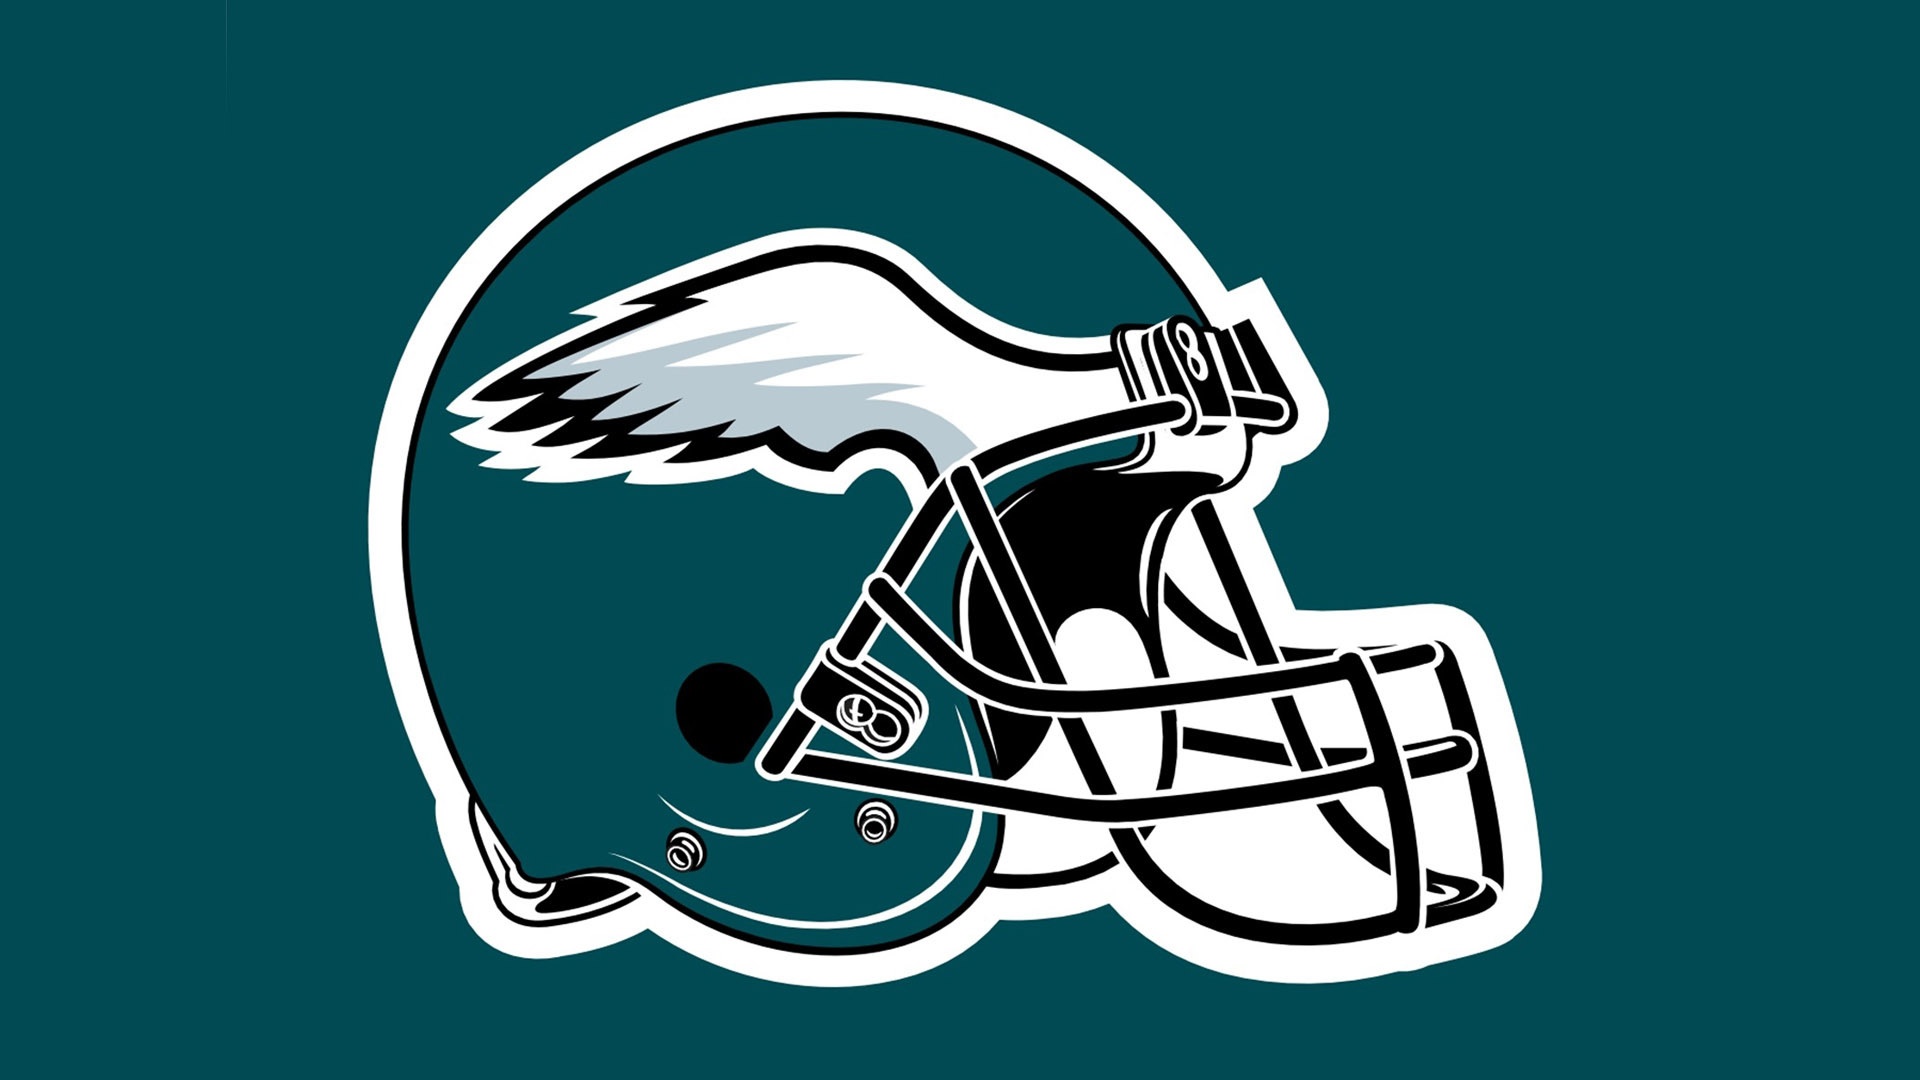 Nfl Eagles background picture